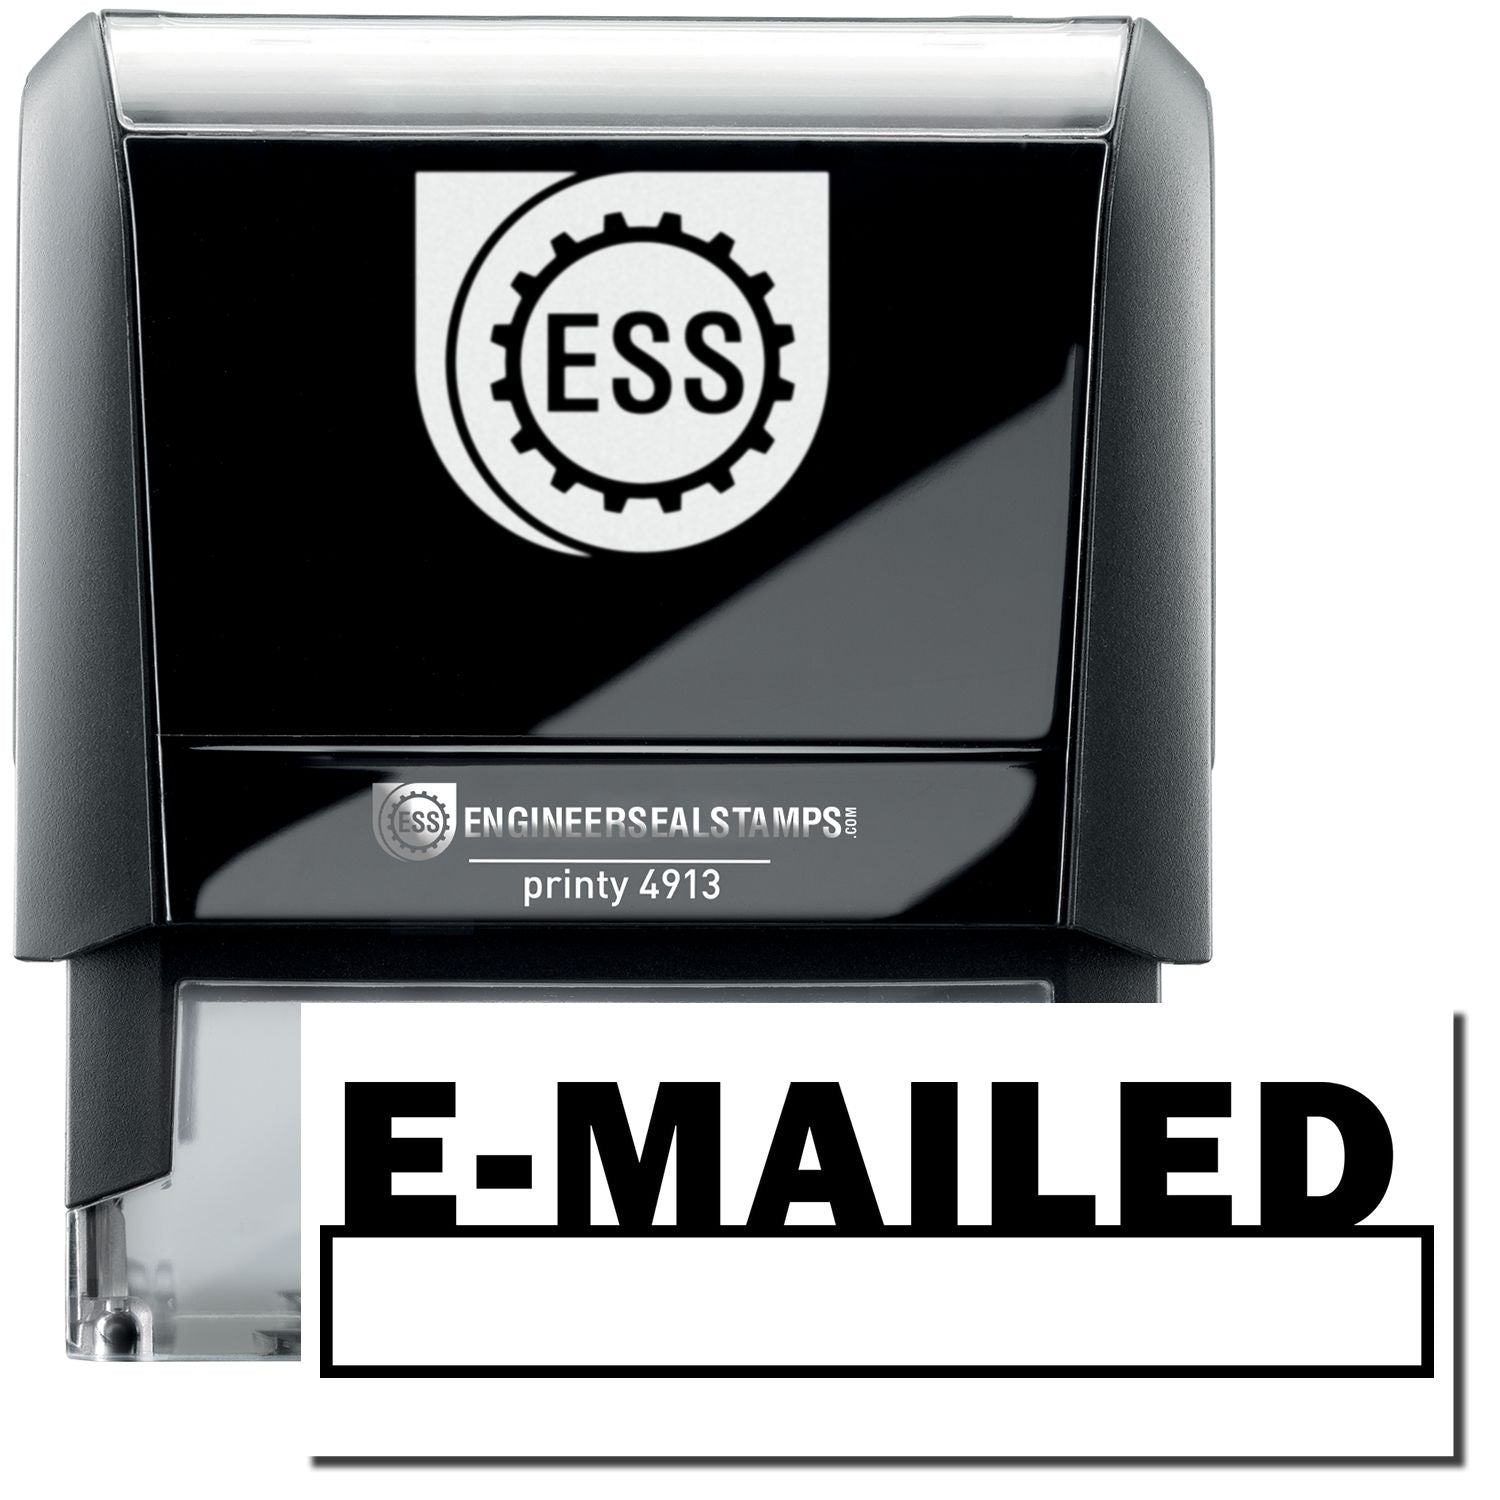 A self-inking stamp with a stamped image showing how the text "E-MAILED" in a large bold font and with a date box under it is displayed after stamping.